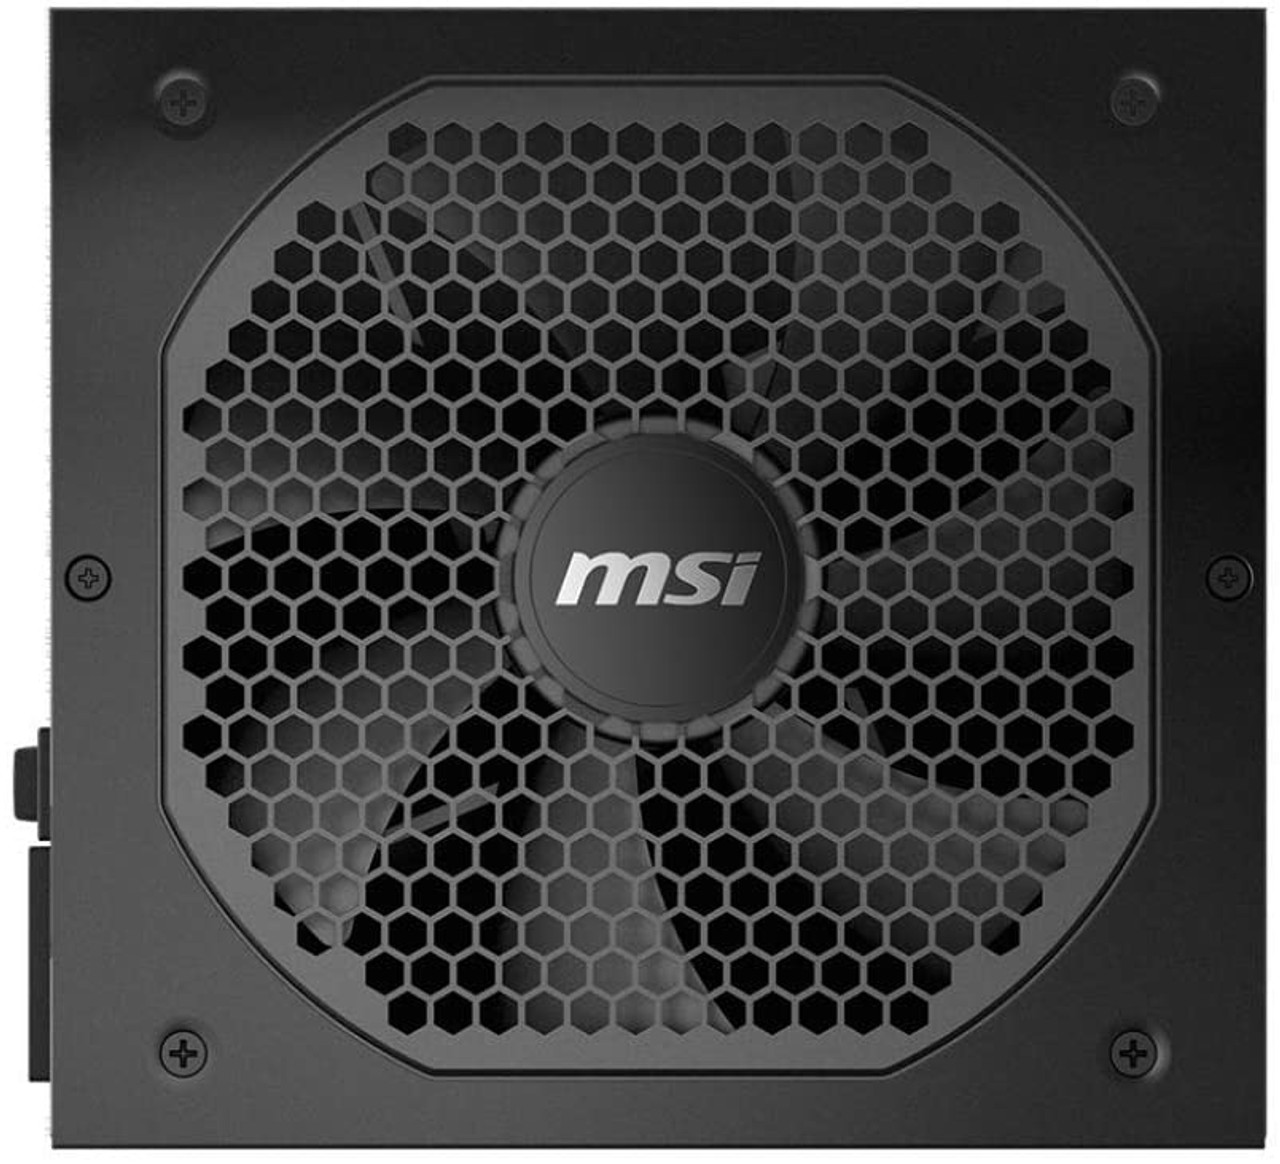  MSI MPG A750GF Gaming Power Supply - Full Modular - 80 PLUS  Gold Certified 750W - 100% Japanese 105°C Capacitors - Compact Size - ATX  PSU : Electronics